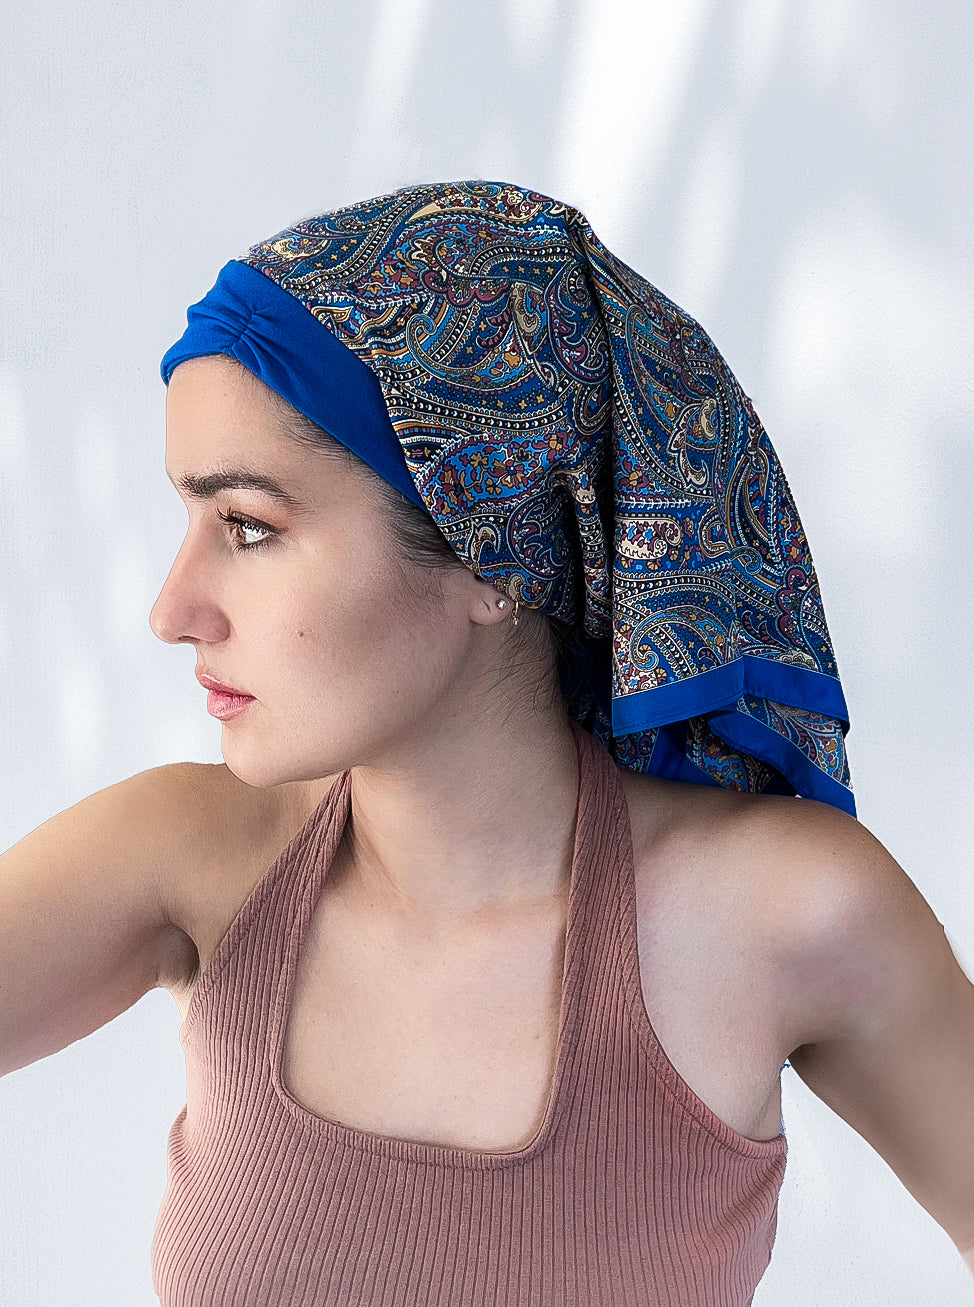 Beautiful woman wearing a blue paisley headscarf designed specifically for those dealing with hair loss